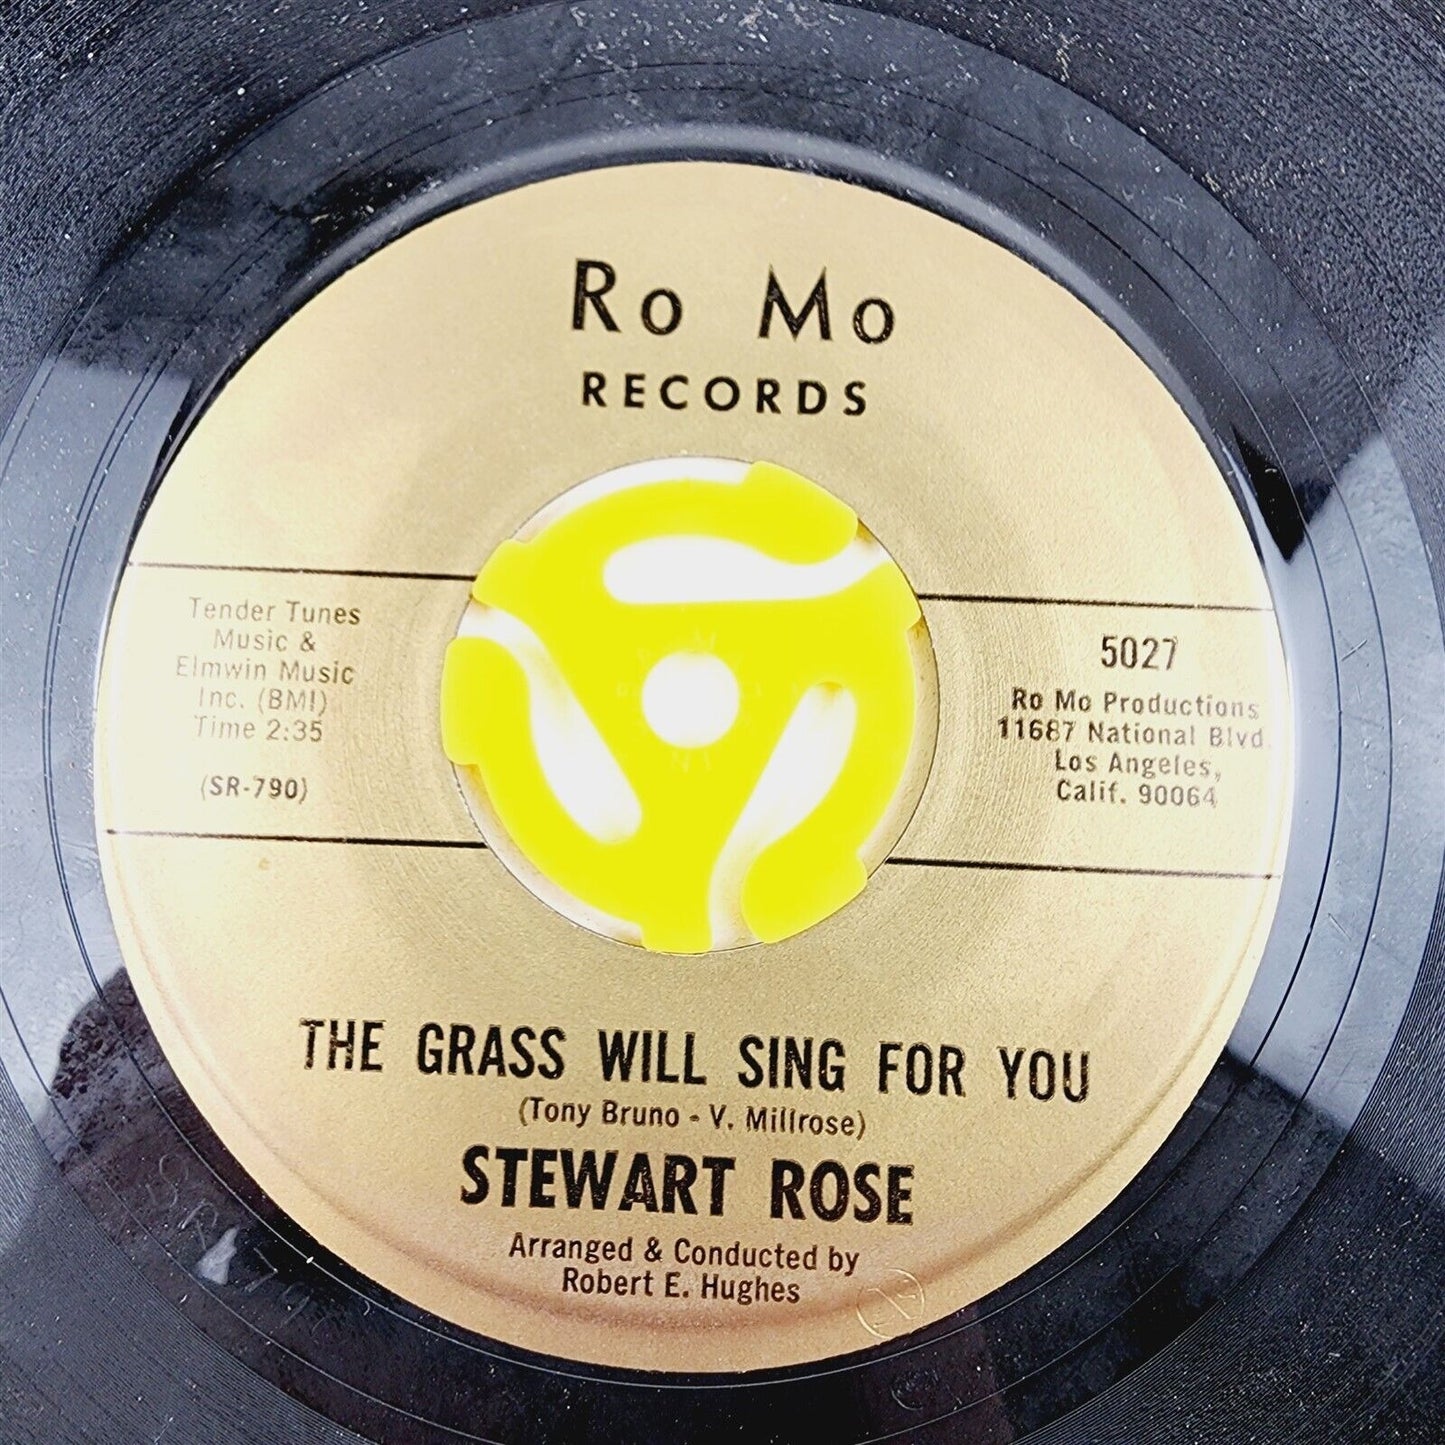 2 45 Stewart Rose Black Bread & Beans Ro Mo Records Hold Me Hold Me Ram Records